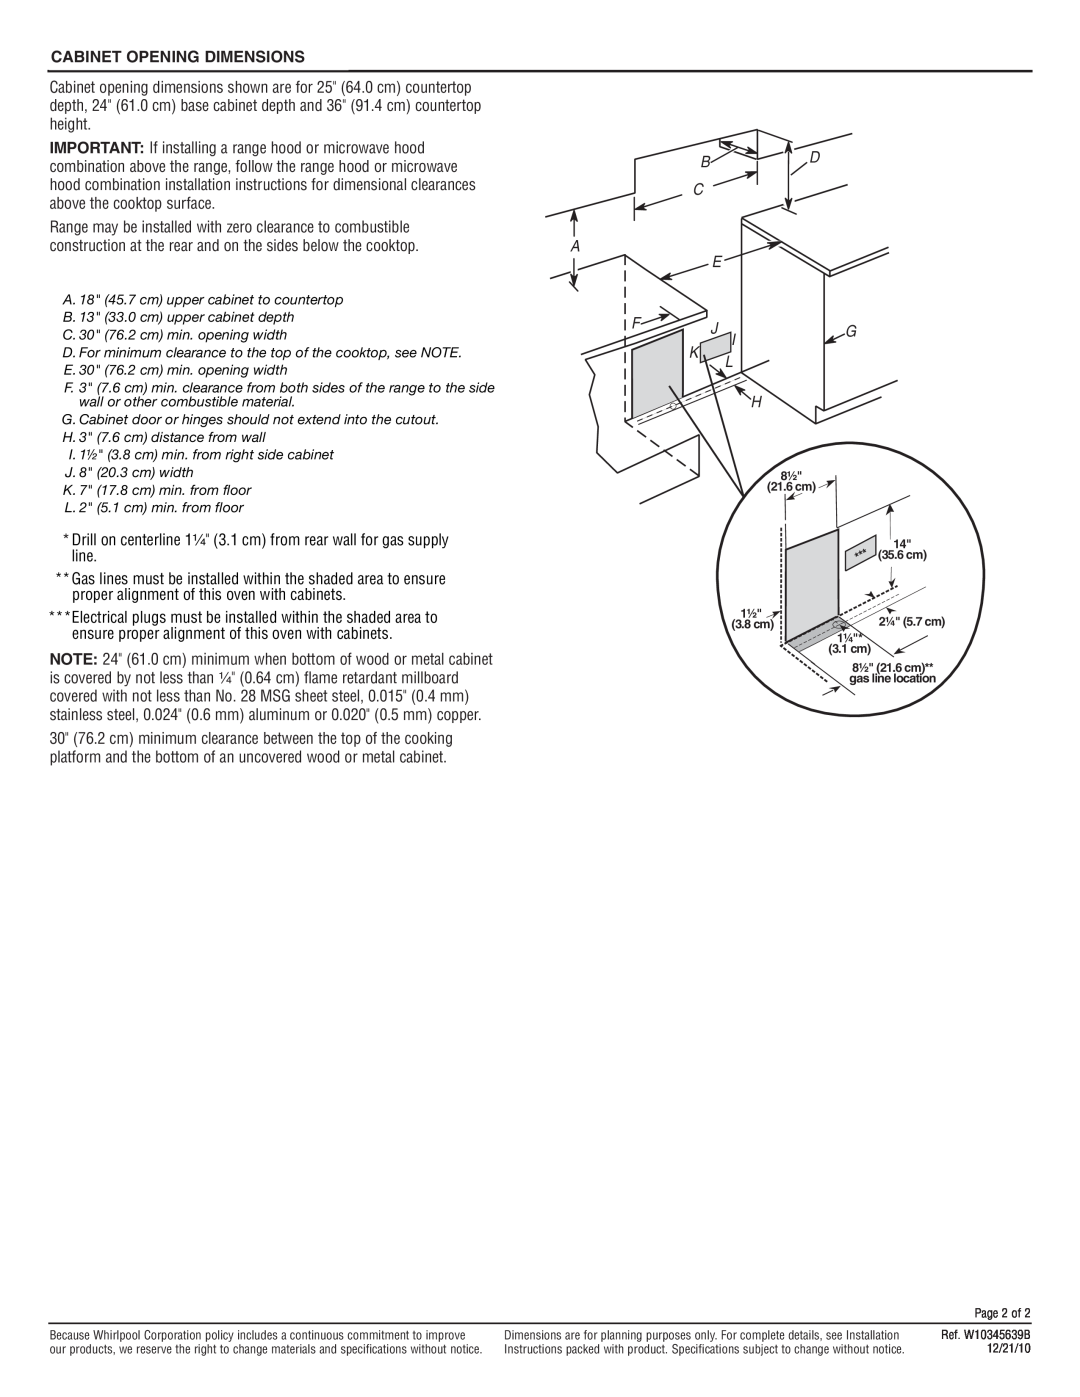 Maytag MGT8775X, MGT8655X Cabinet Opening Dimensions, Drill on centerline 1¹⁄₄ 3.1 cm from rear wall for gas supply line 